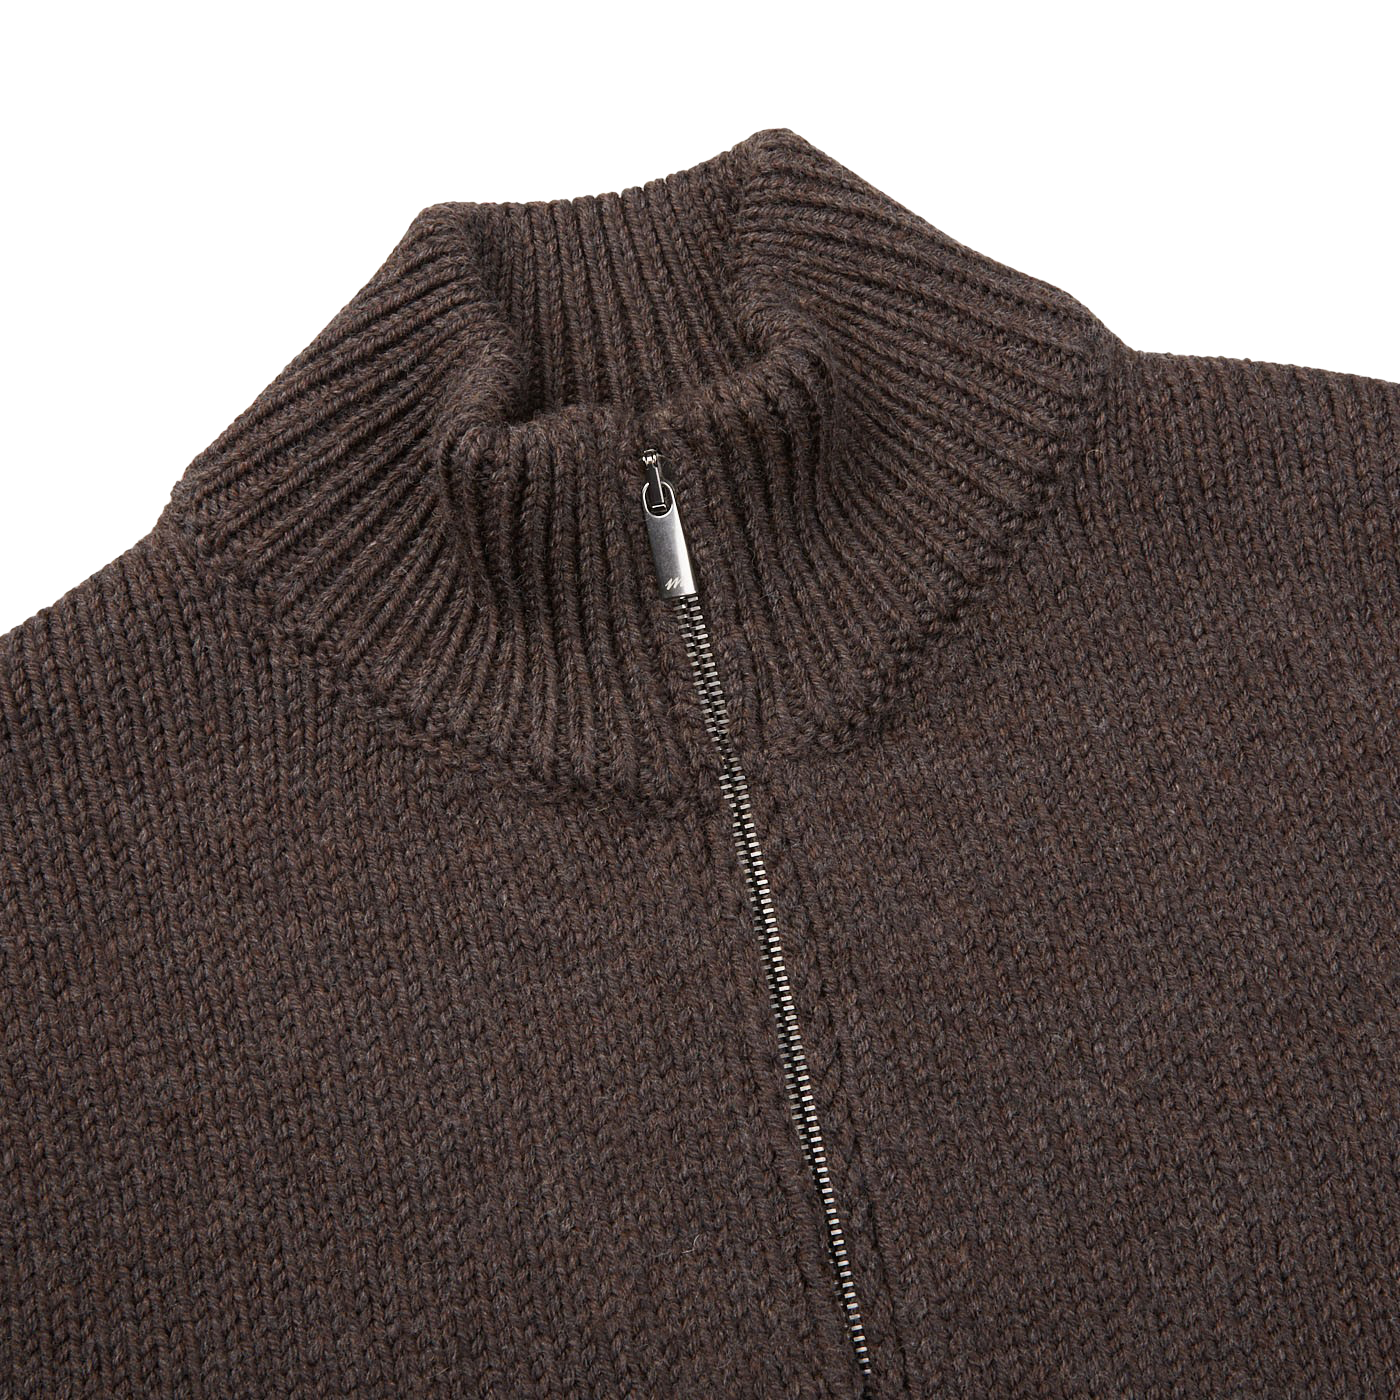 A close up of a Dark Brown Heavy Wool Maxim Zip Jacket by Massimo Alba.